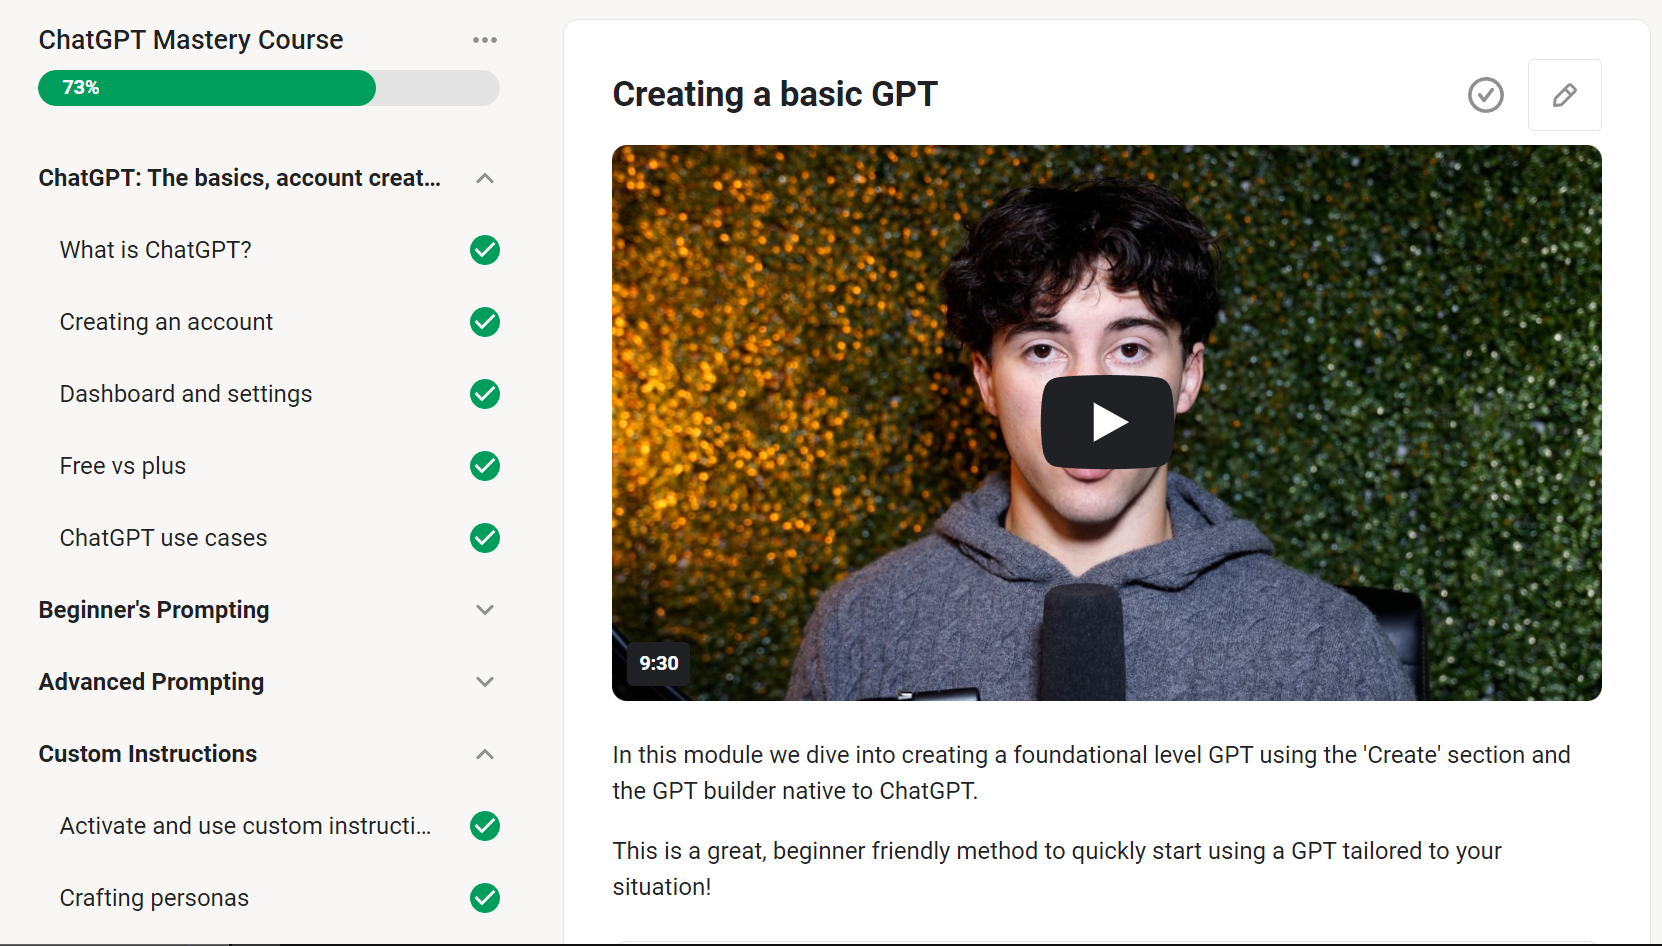 ChatGPT Mastery Course By Drake Surach - Free Download + AI Pioneers